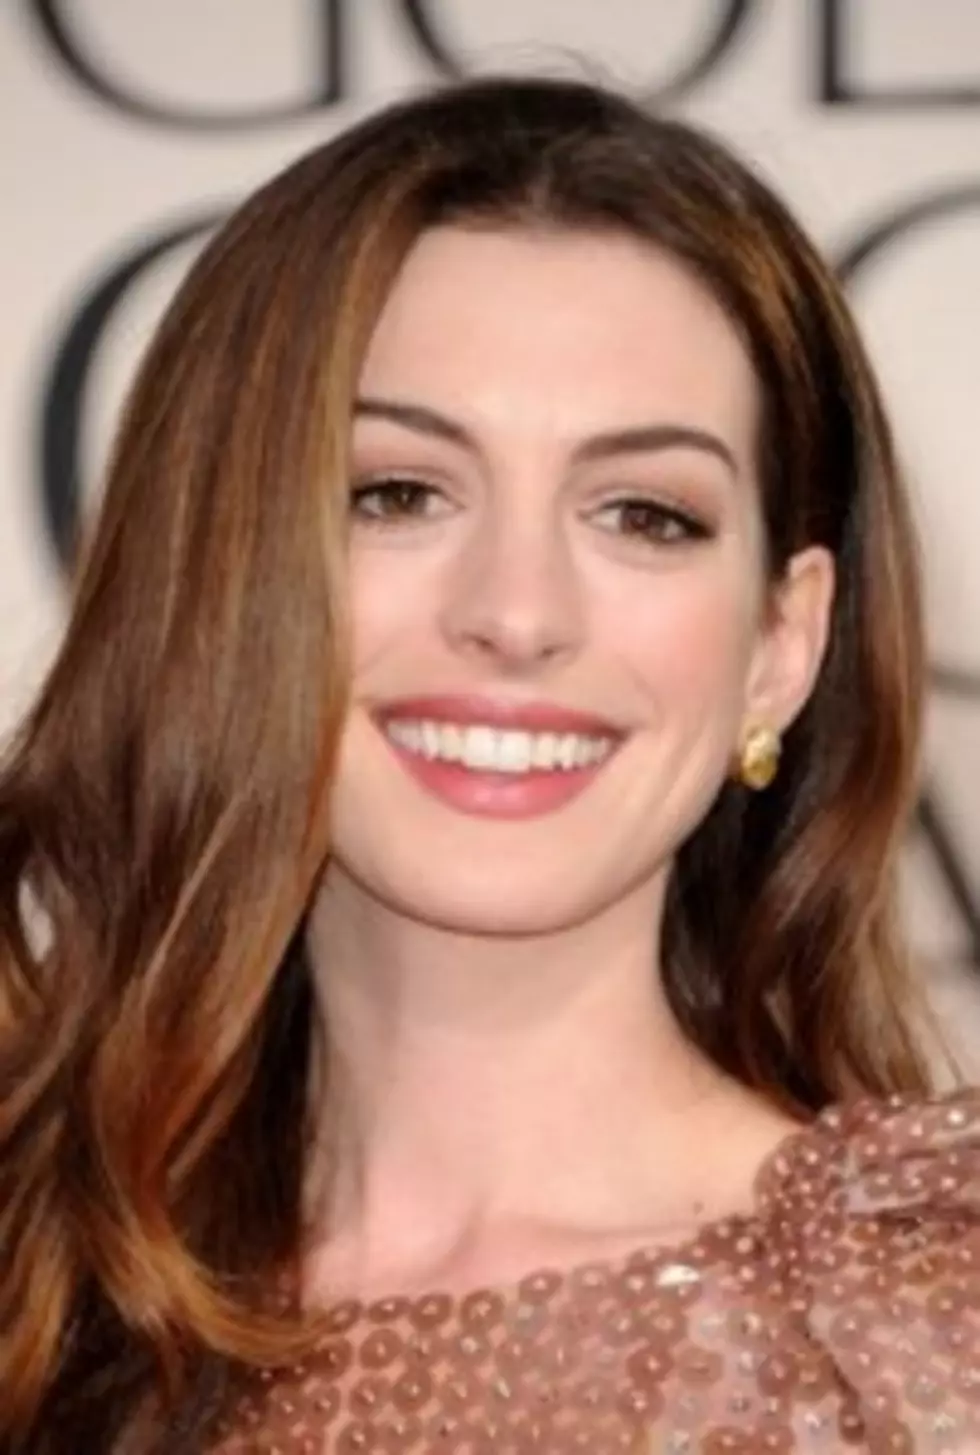 Anne Hathaway Is Latest Star Confirmed For Guest Spot On &#8220;Glee&#8221;